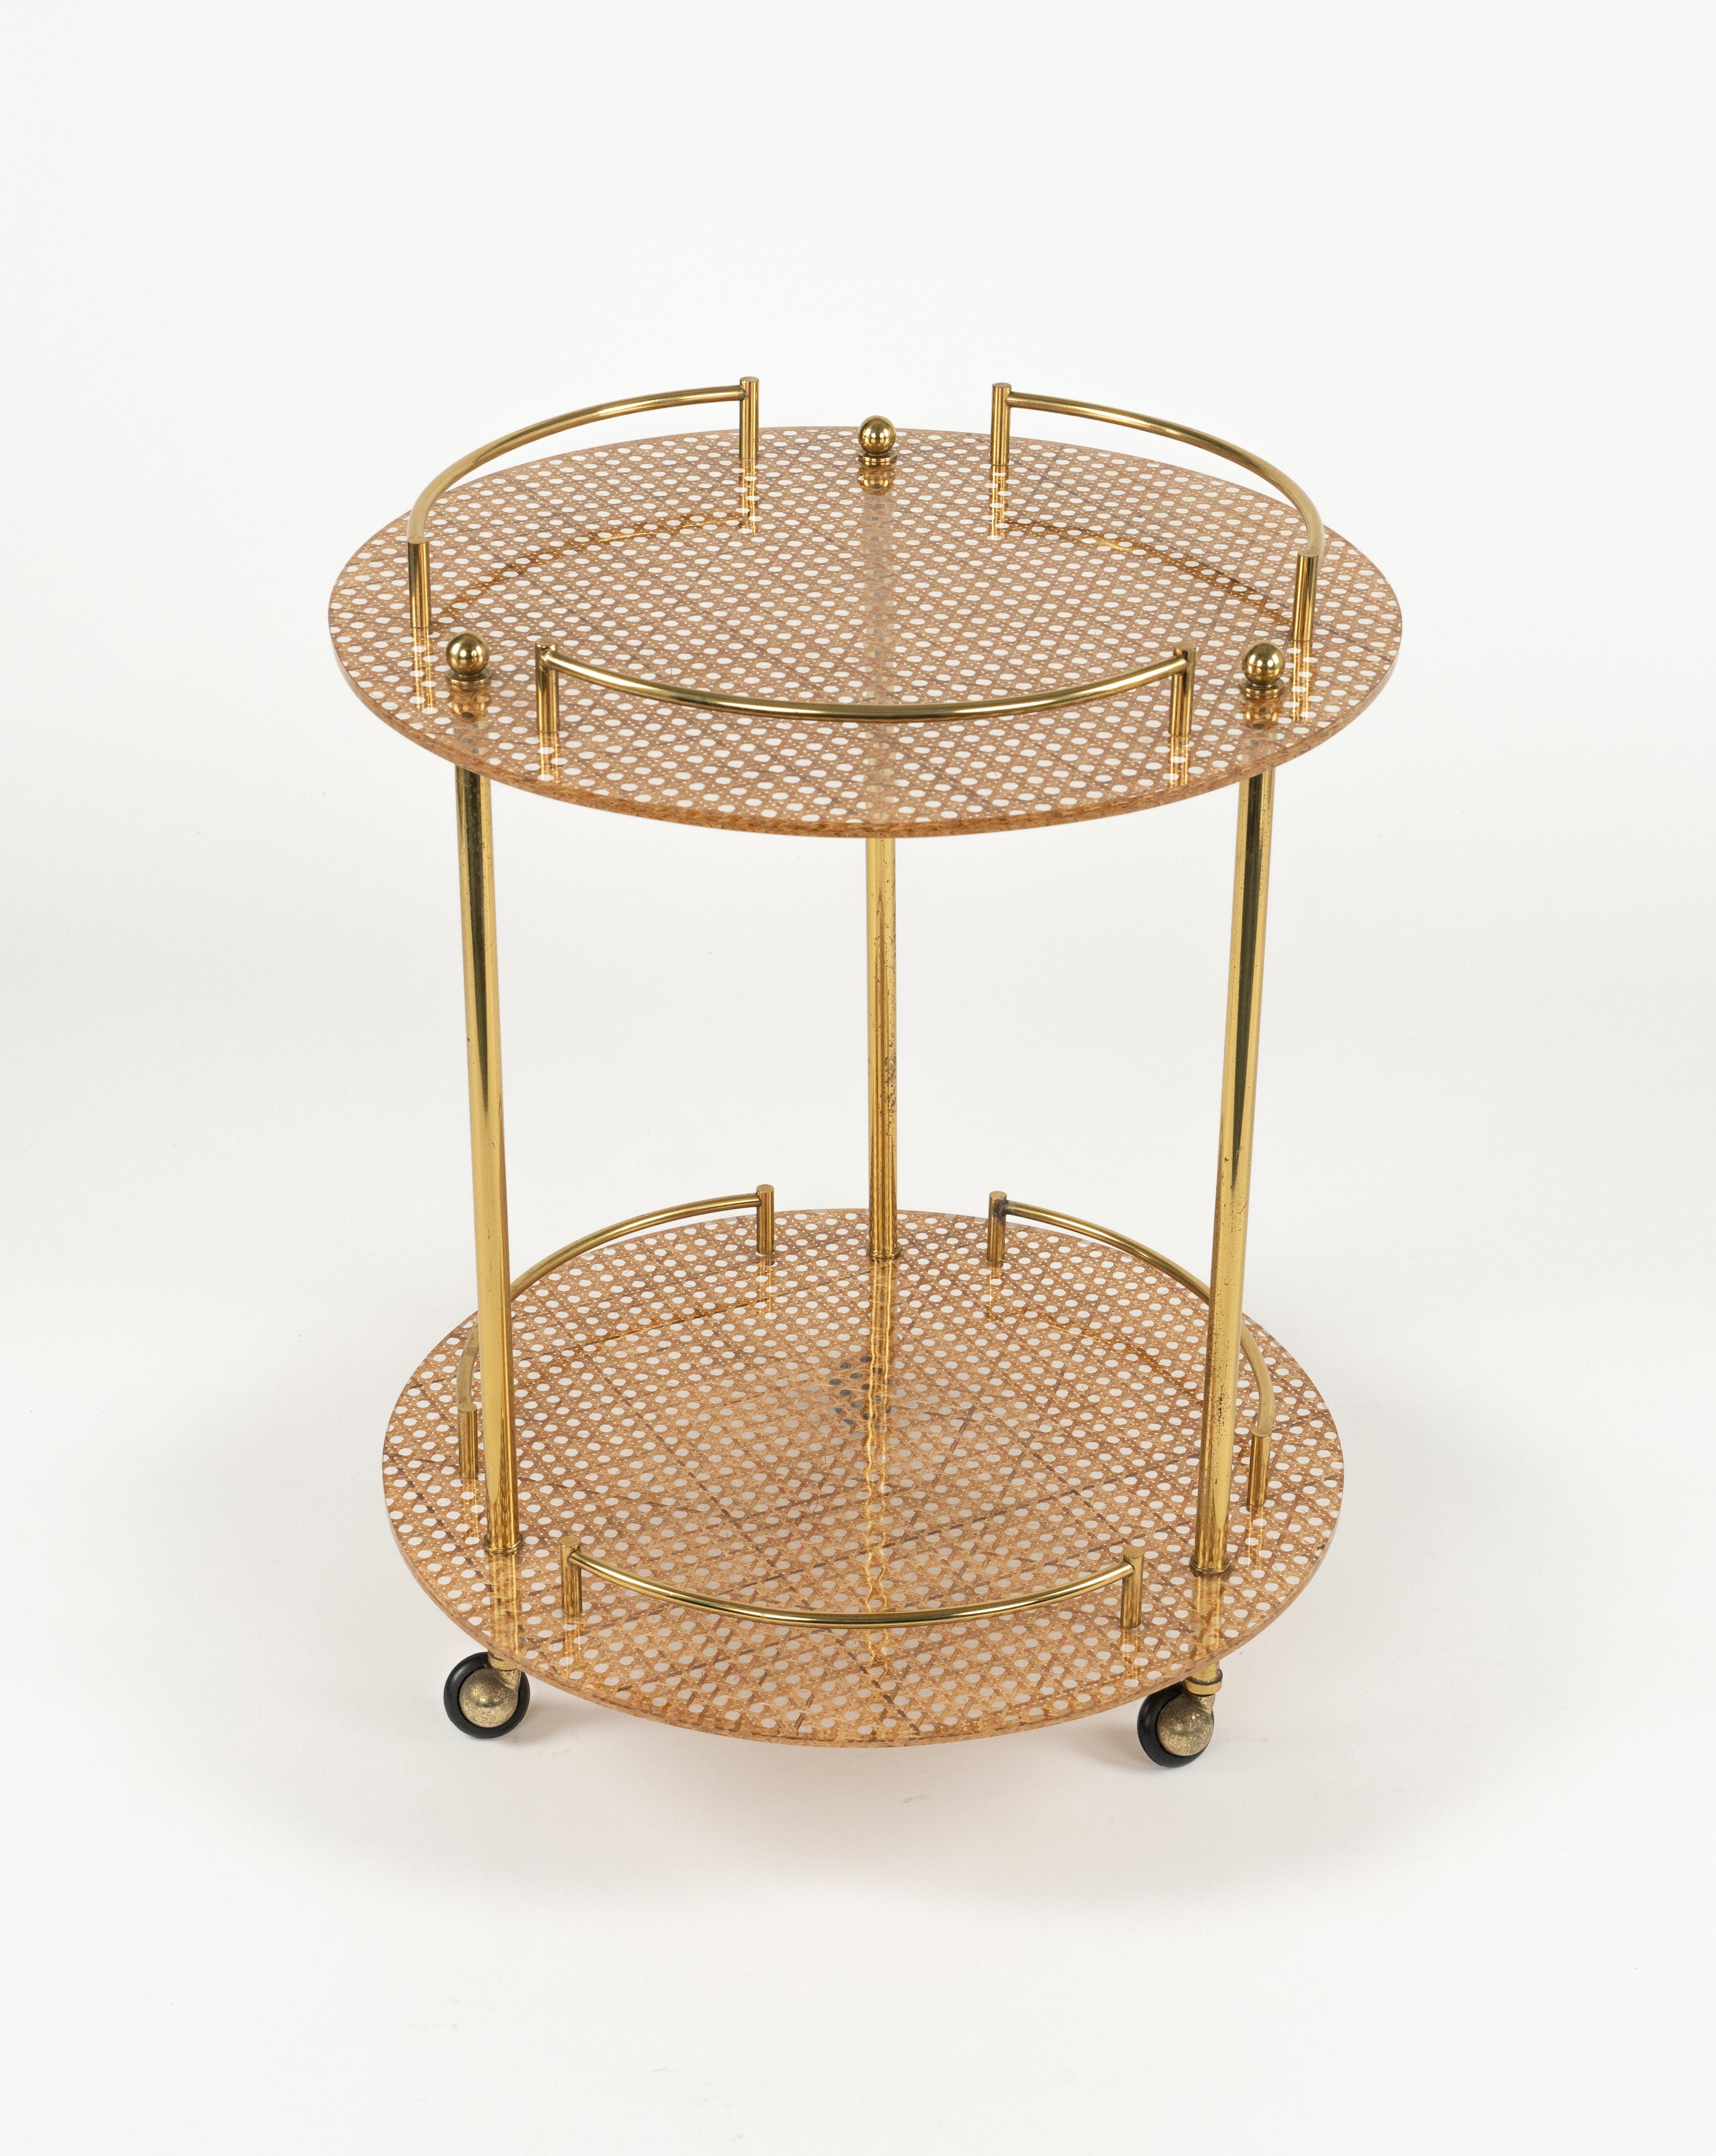 Metal Serving Bar Cart in Lucite, Brass and Rattan Christian Dior Style, Italy 1970s For Sale